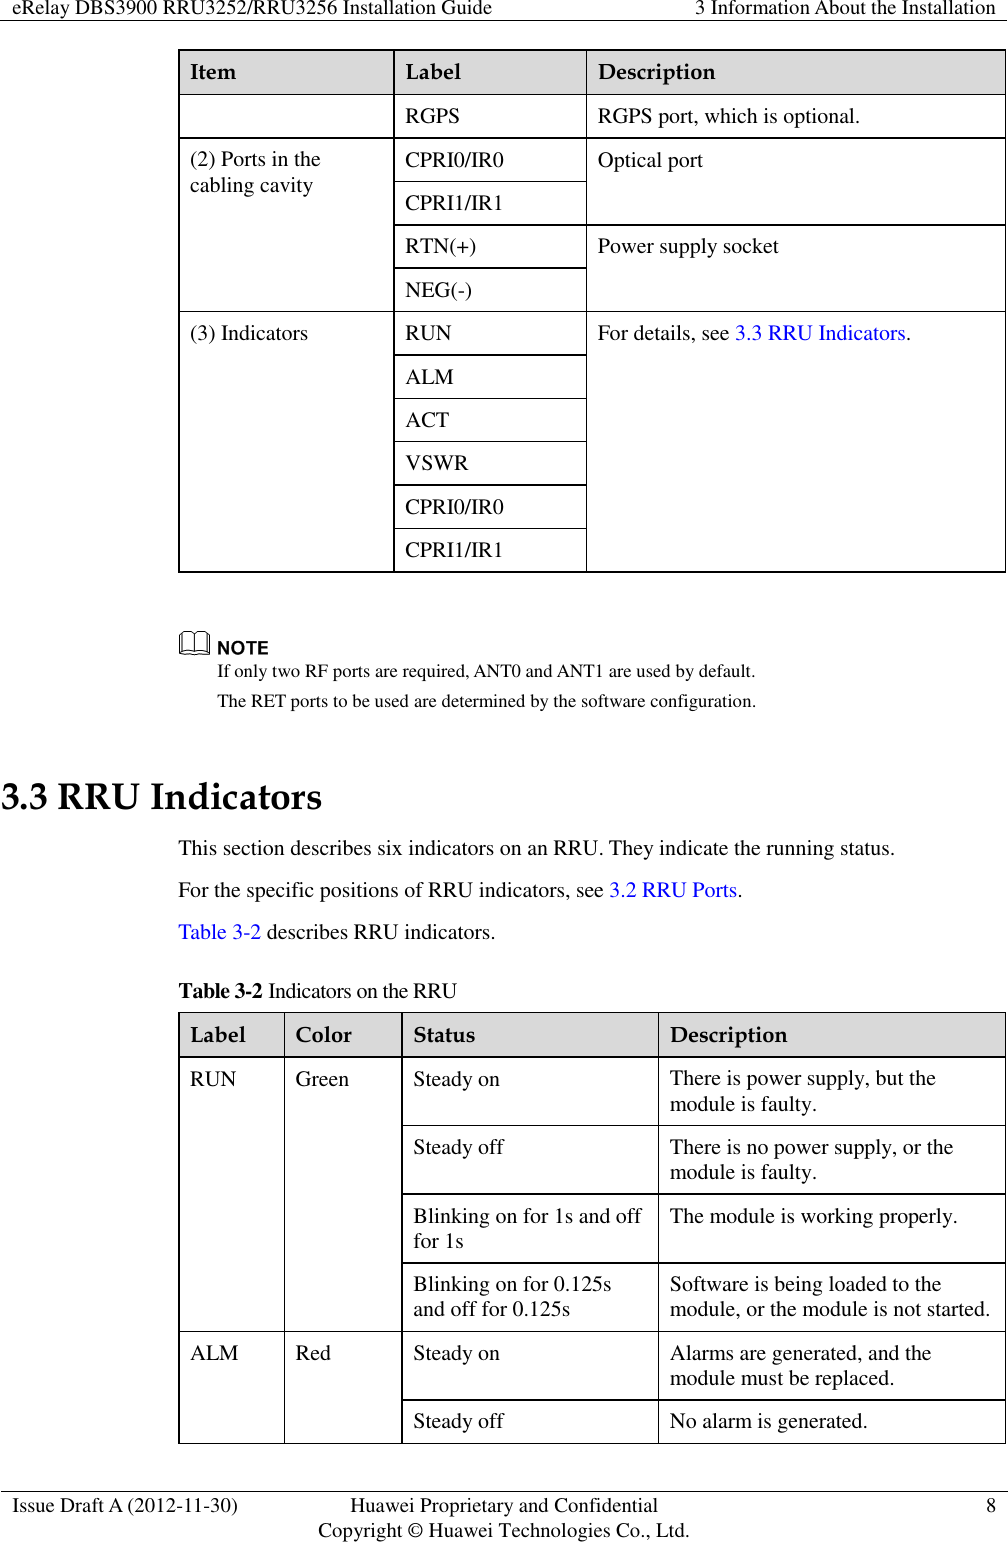 eRelay DBS3900 RRU3252/RRU3256 Installation Guide 3 Information About the Installation  Issue Draft A (2012-11-30) Huawei Proprietary and Confidential                                     Copyright © Huawei Technologies Co., Ltd. 8  Item Label Description RGPS RGPS port, which is optional. (2) Ports in the cabling cavity CPRI0/IR0 Optical port CPRI1/IR1 RTN(+) Power supply socket NEG(-) (3) Indicators RUN For details, see 3.3 RRU Indicators. ALM ACT VSWR CPRI0/IR0 CPRI1/IR1   If only two RF ports are required, ANT0 and ANT1 are used by default. The RET ports to be used are determined by the software configuration. 3.3 RRU Indicators This section describes six indicators on an RRU. They indicate the running status.   For the specific positions of RRU indicators, see 3.2 RRU Ports. Table 3-2 describes RRU indicators. Table 3-2 Indicators on the RRU Label Color Status Description RUN Green Steady on There is power supply, but the module is faulty. Steady off There is no power supply, or the module is faulty. Blinking on for 1s and off for 1s The module is working properly. Blinking on for 0.125s and off for 0.125s Software is being loaded to the module, or the module is not started. ALM Red Steady on Alarms are generated, and the module must be replaced. Steady off No alarm is generated. 